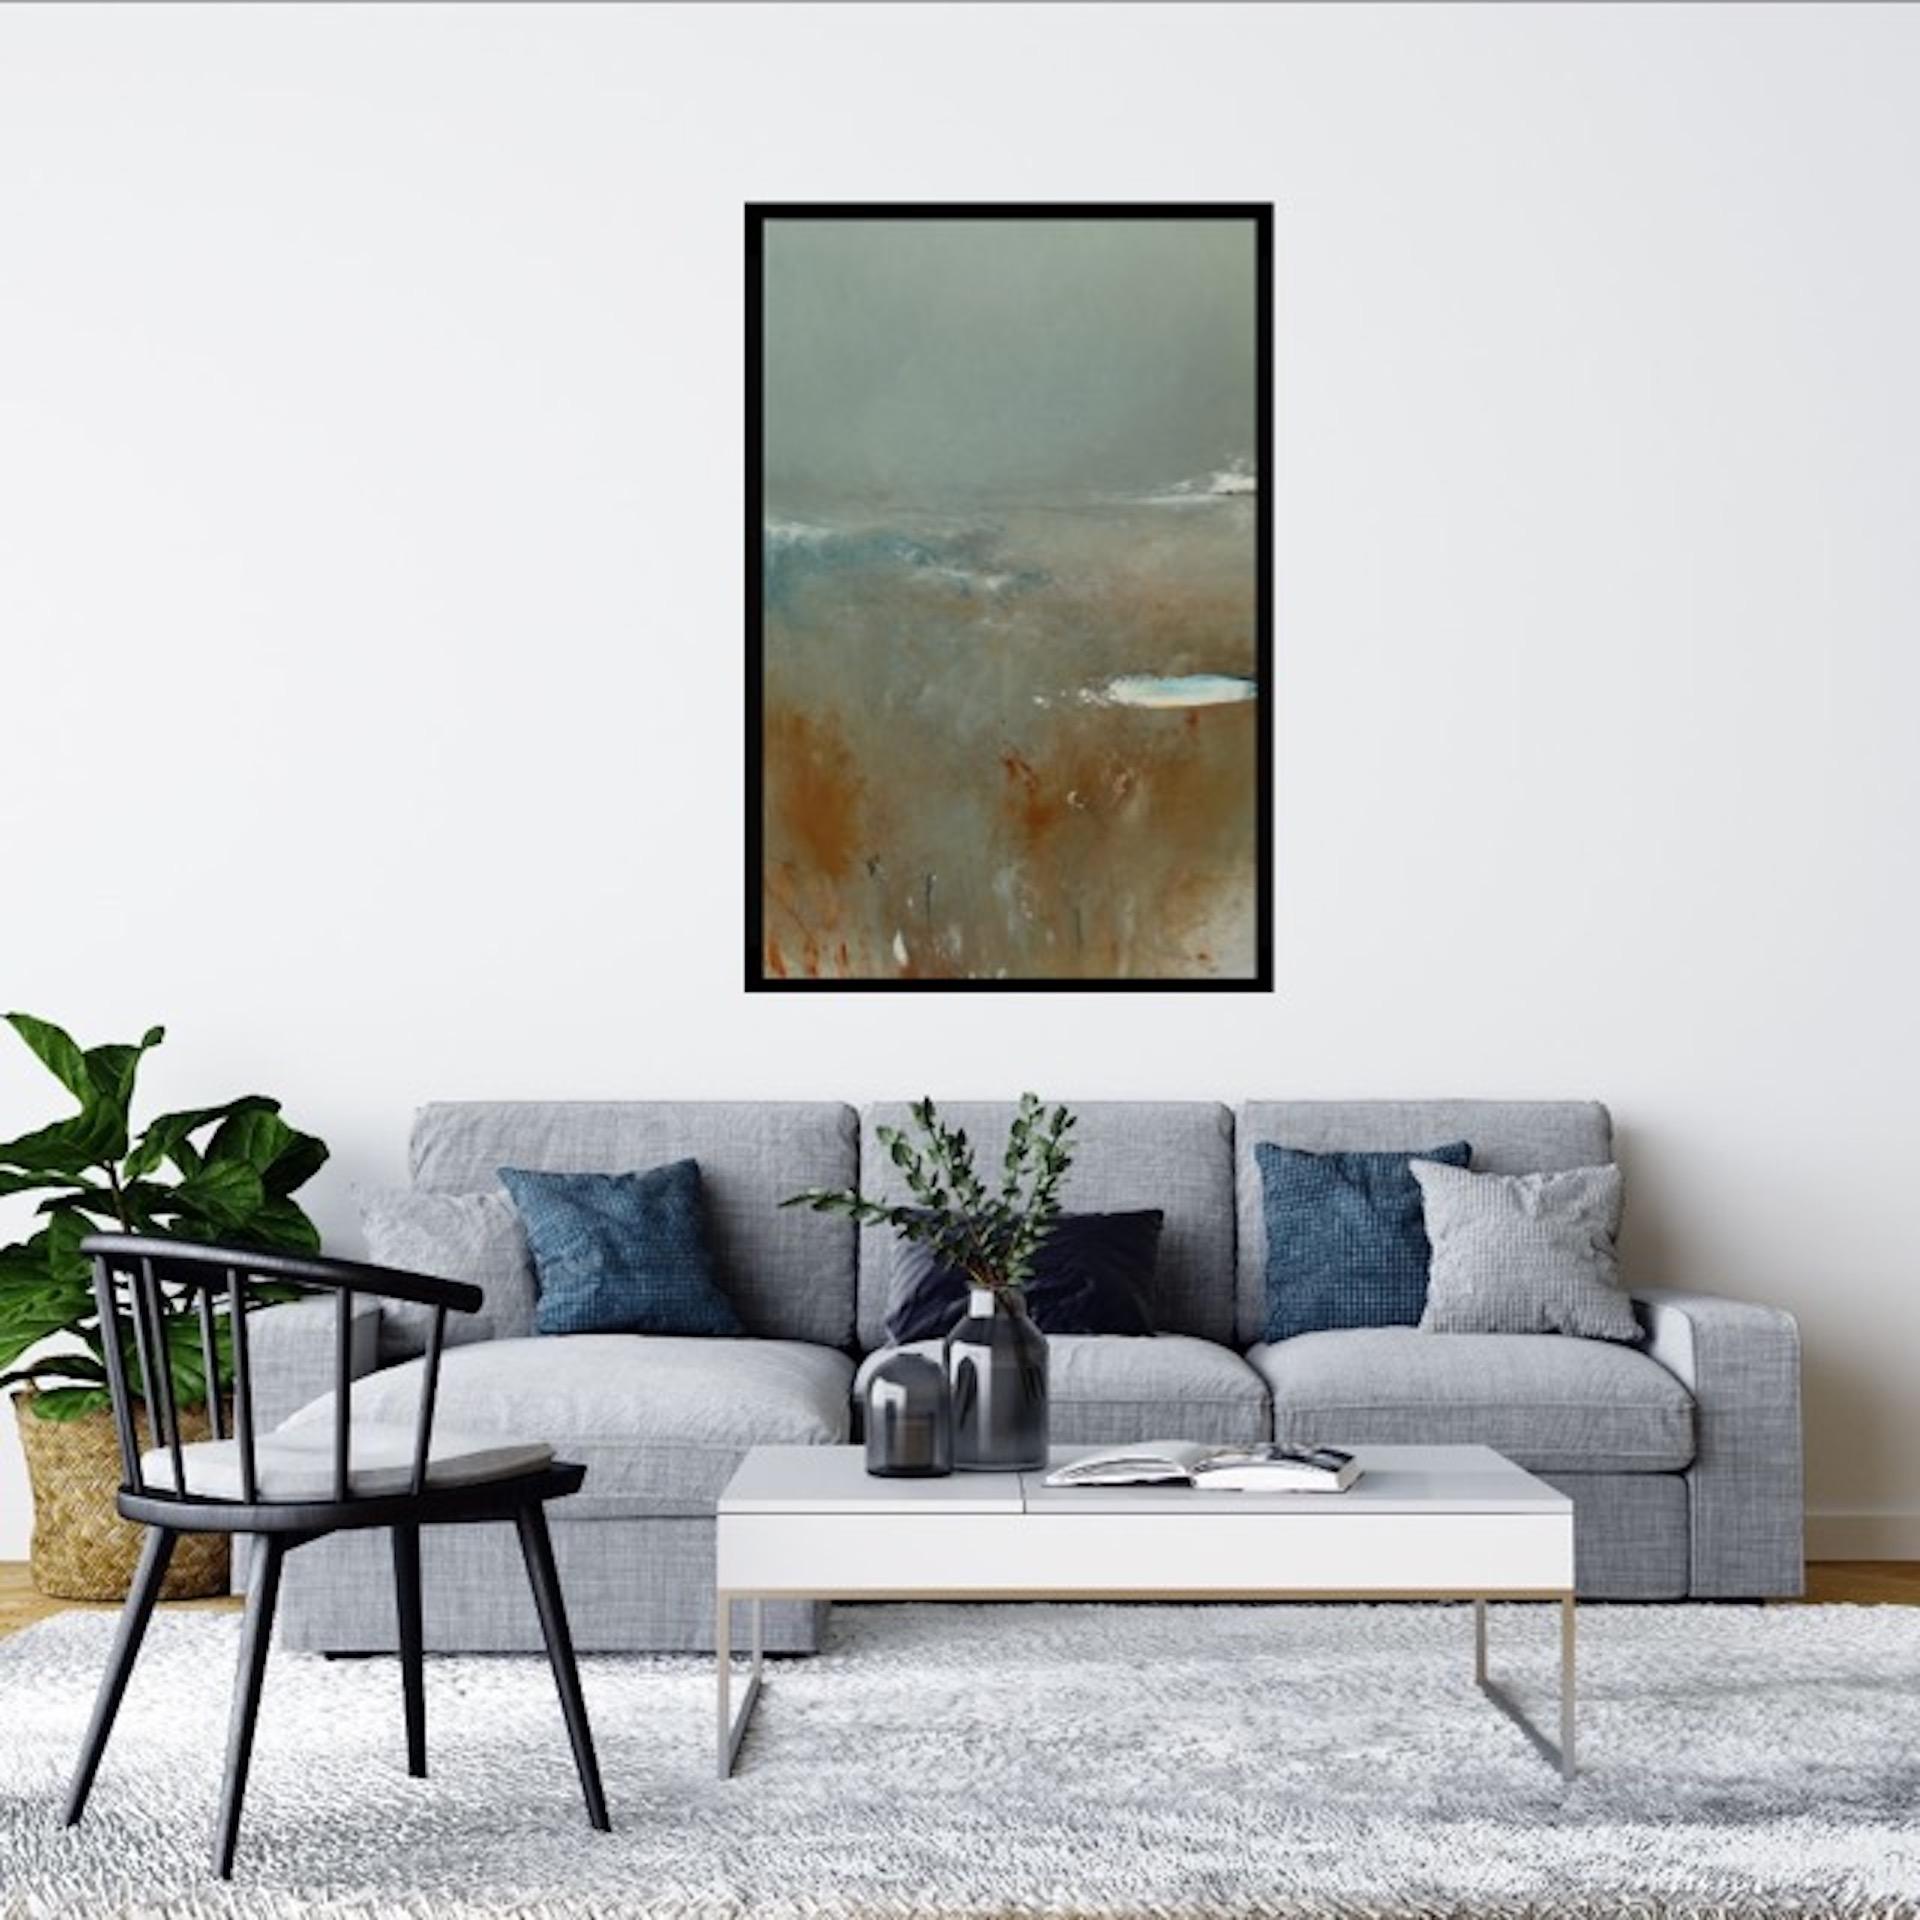 Mark Stopforth “winter morning light” (60x90cm unframed) Minimalist work based upon a memory and evocation of a moorland seen first thing on a Winter’s morning. Medium used oil, charcoal and pencil on Fabriano paper.